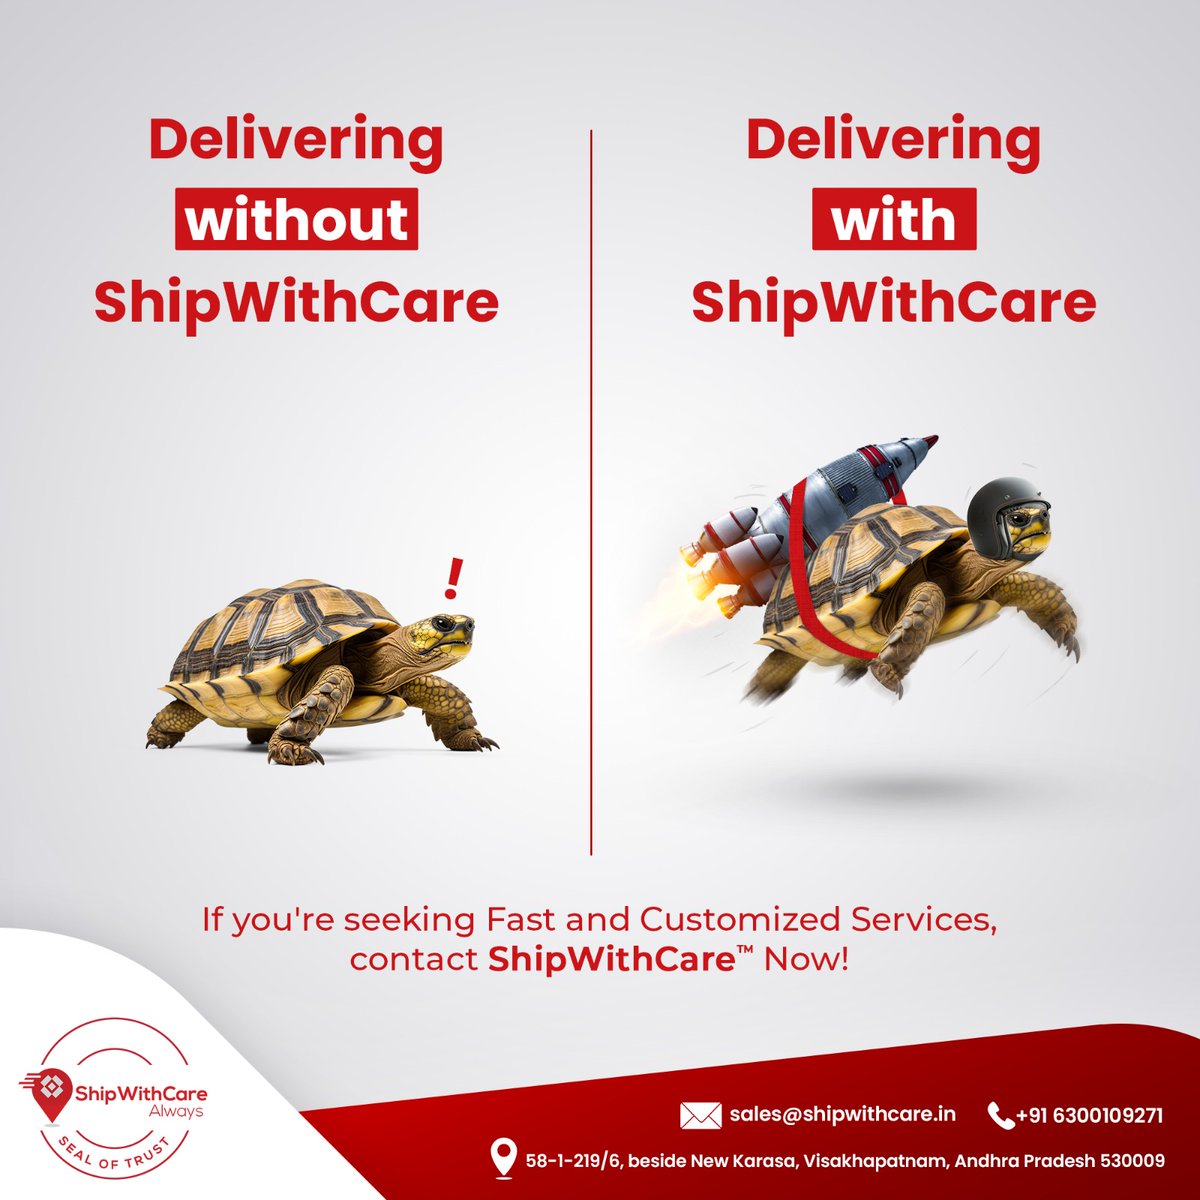 For fast and customized services, contact ShipWithCare now.
Your shipping needs, our priority.
.
.
.
#ShipWithCareNow #FastShipping #CustomizedServices #PriorityShipping #EfficientDelivery